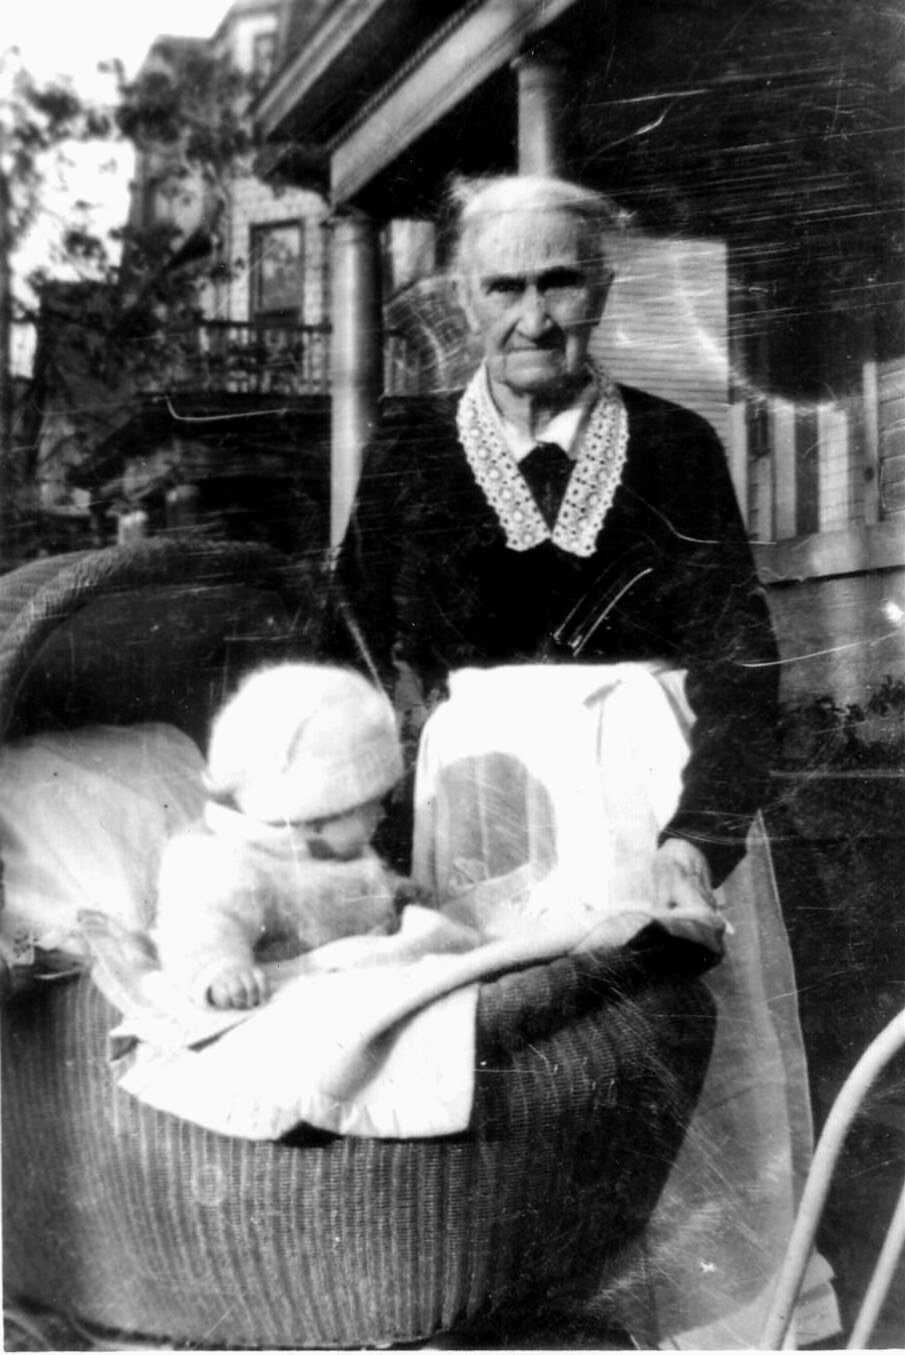 Ann Sullivan O’Brien at age 88  yrs of age (1837-1928) posing with her great grandson, John James O’Brien in his wicker buggy.  Ann was a devout Catholic, and in later years, could often be found praying her rosary on her front porch.  
Ann was born in Cobb Ireland and immigrated in May 1849 with her family.